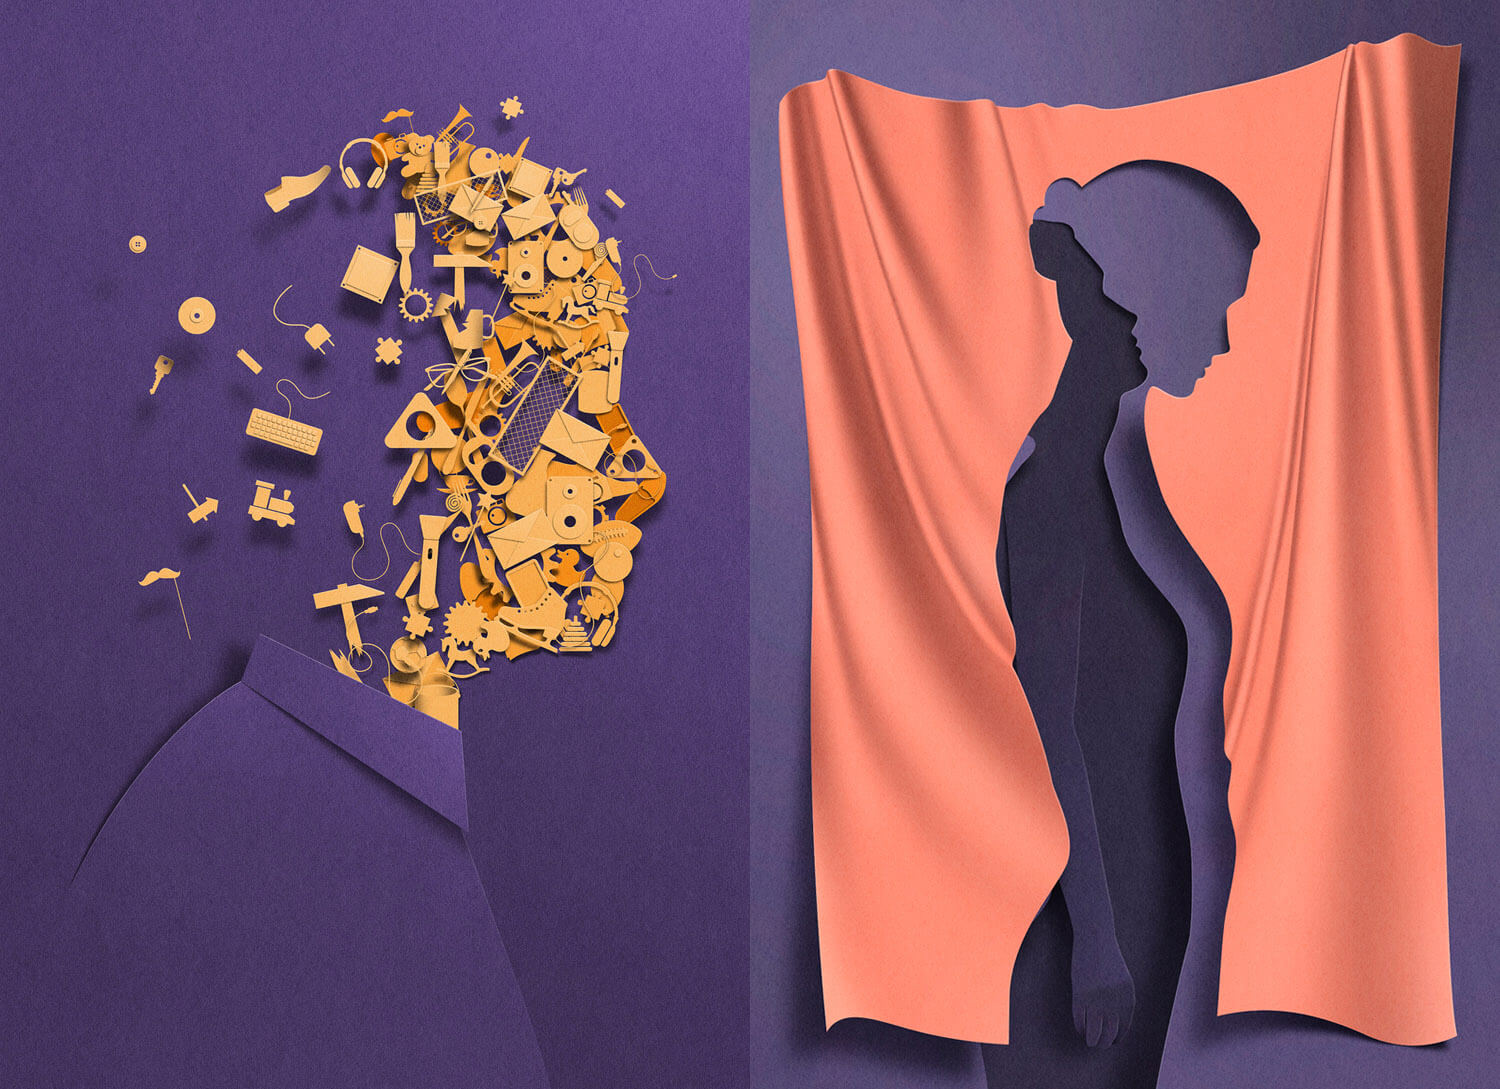 portraits made with a cut paper style